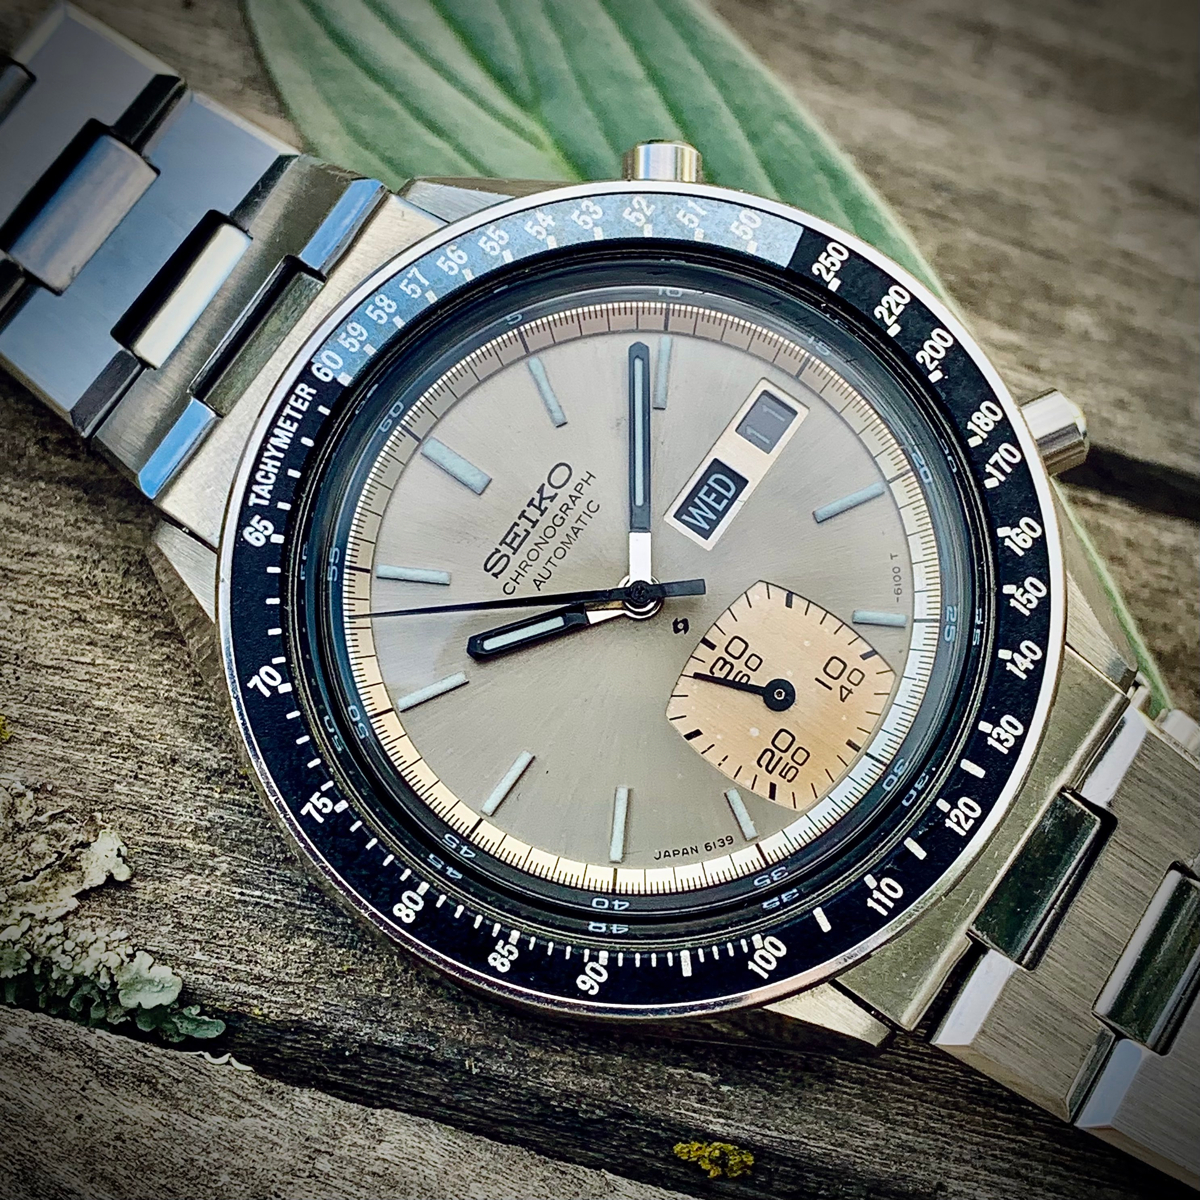 Owner Review: Seiko 6139-6040 Silver Ghost or Unsaturated Anomaly?